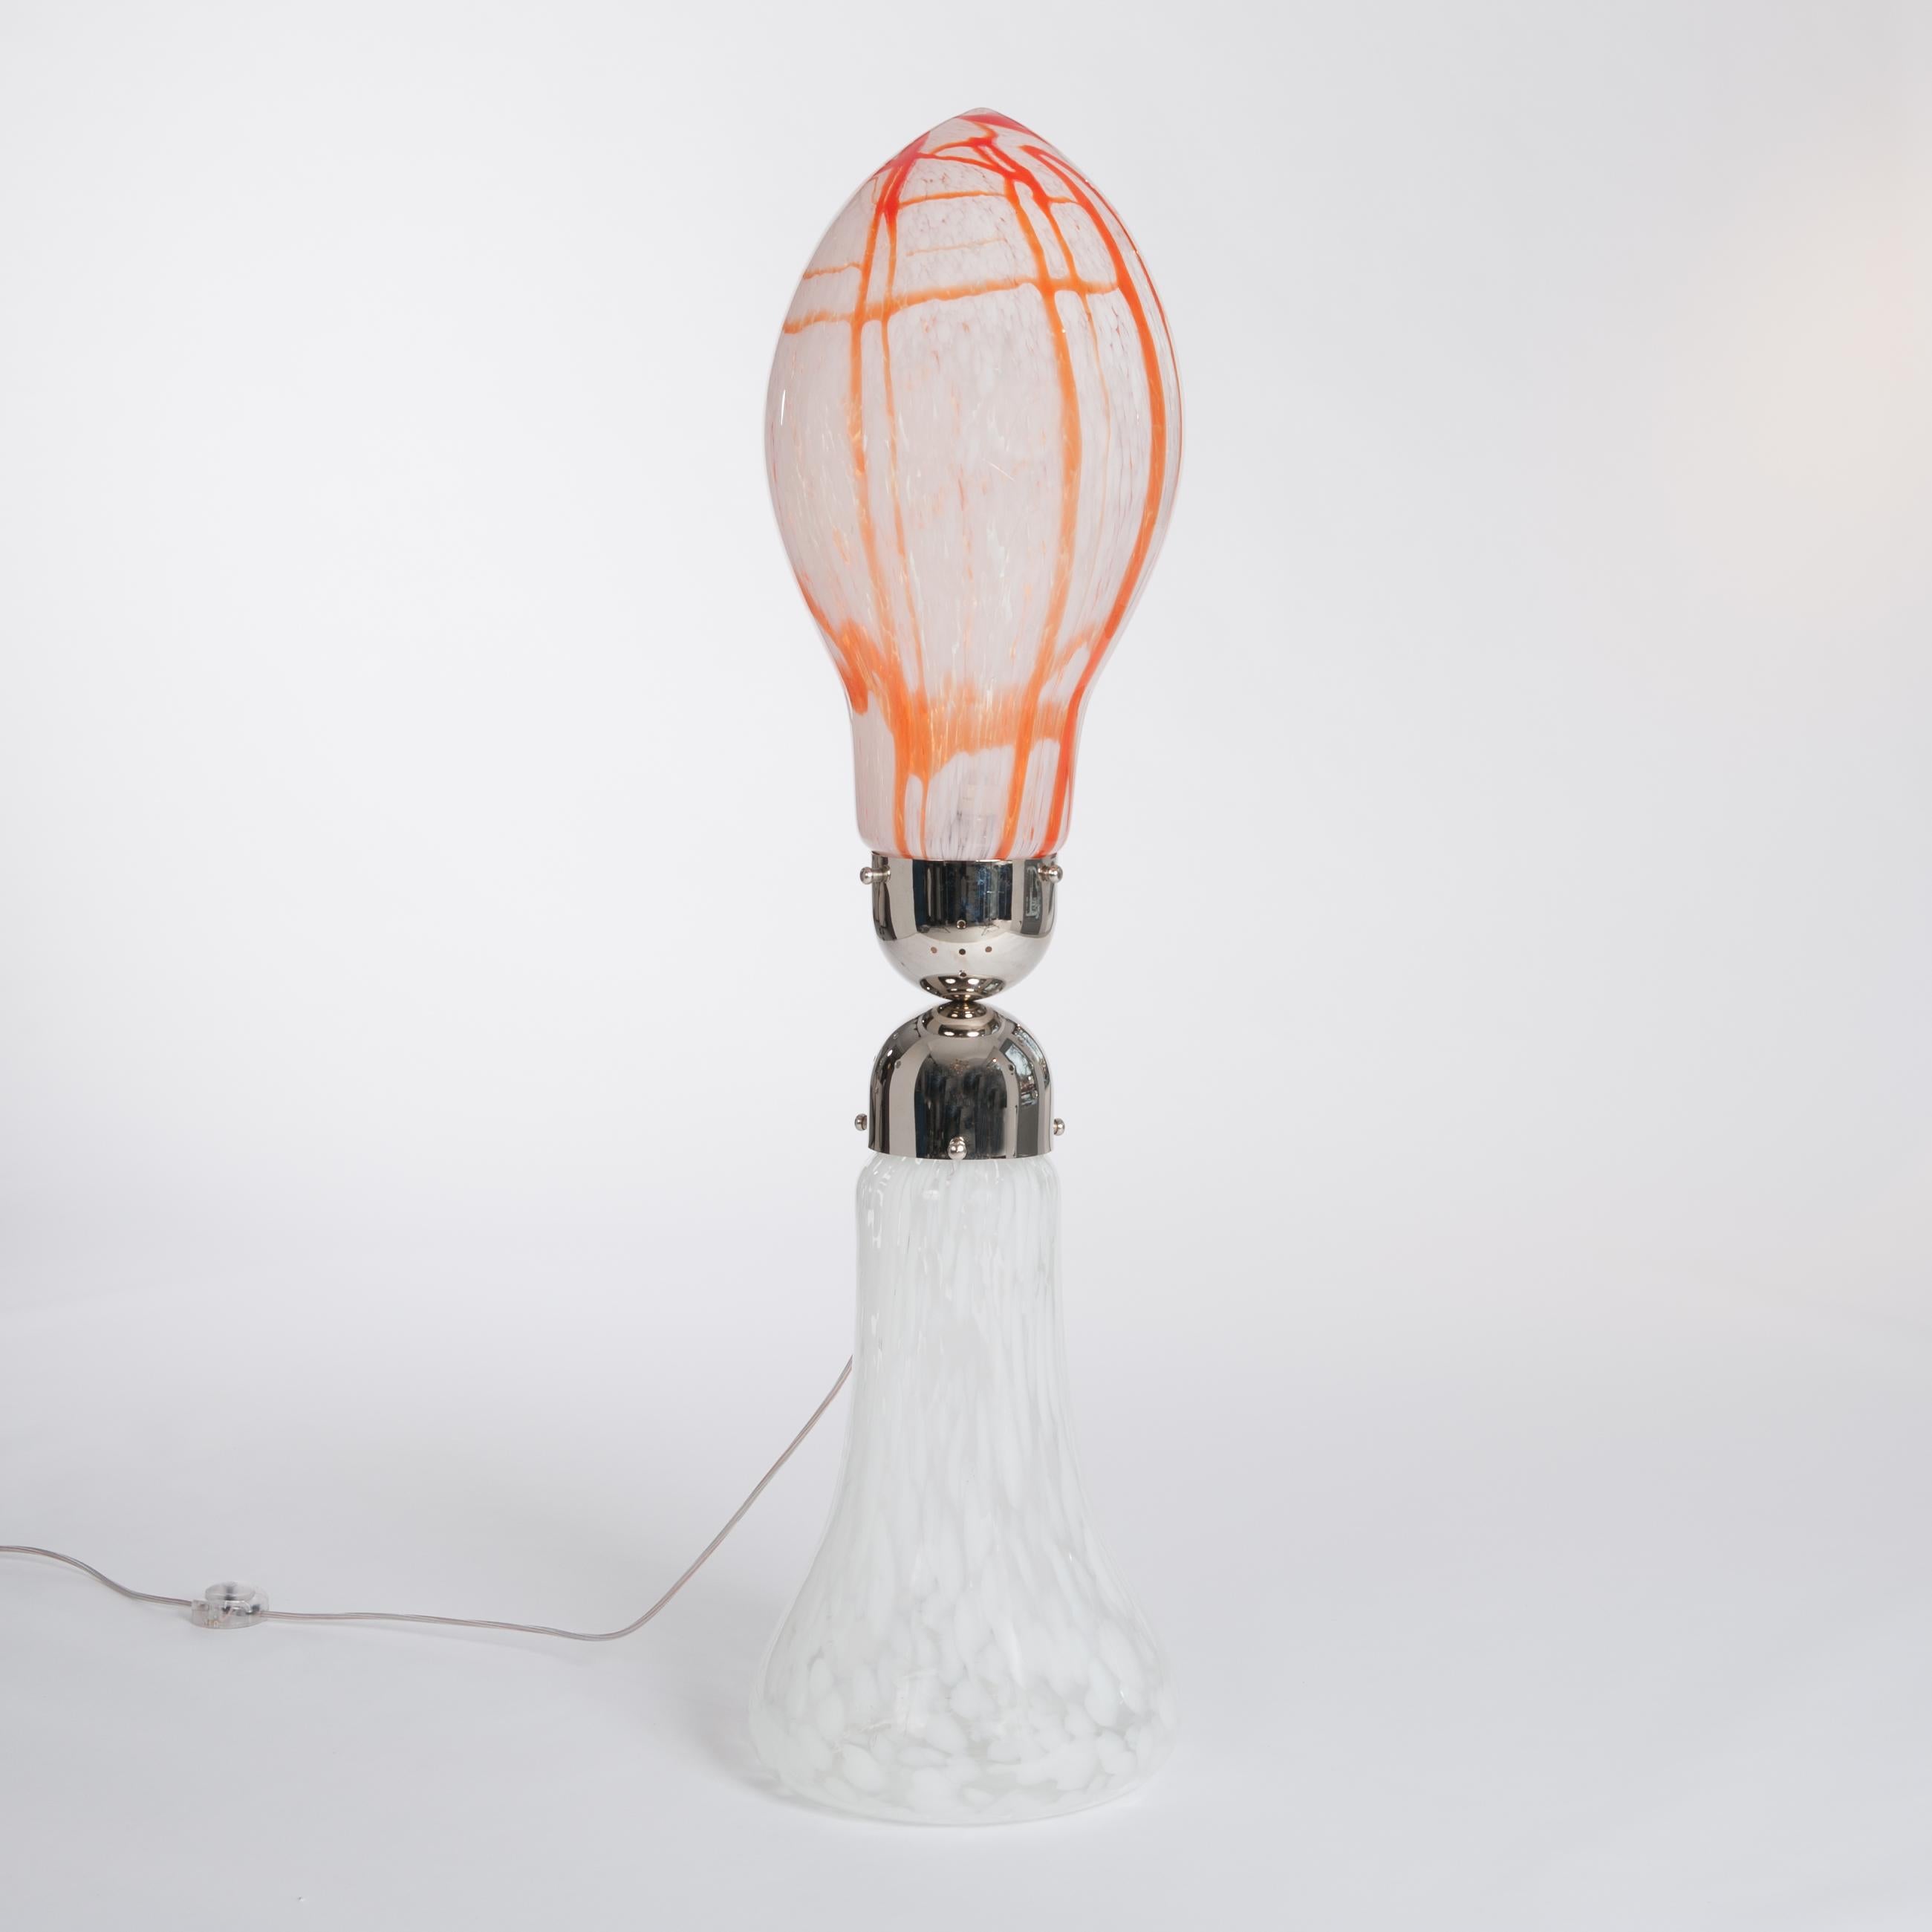 Carlo Nason lipstick floor lamp manufactured by Mazzega in the 1960s.
Two mouth blown Murano glass parts with abstract glass design in orange-red-white 
combined through a metal (re-nickeled) construction - which includes the electricfication.